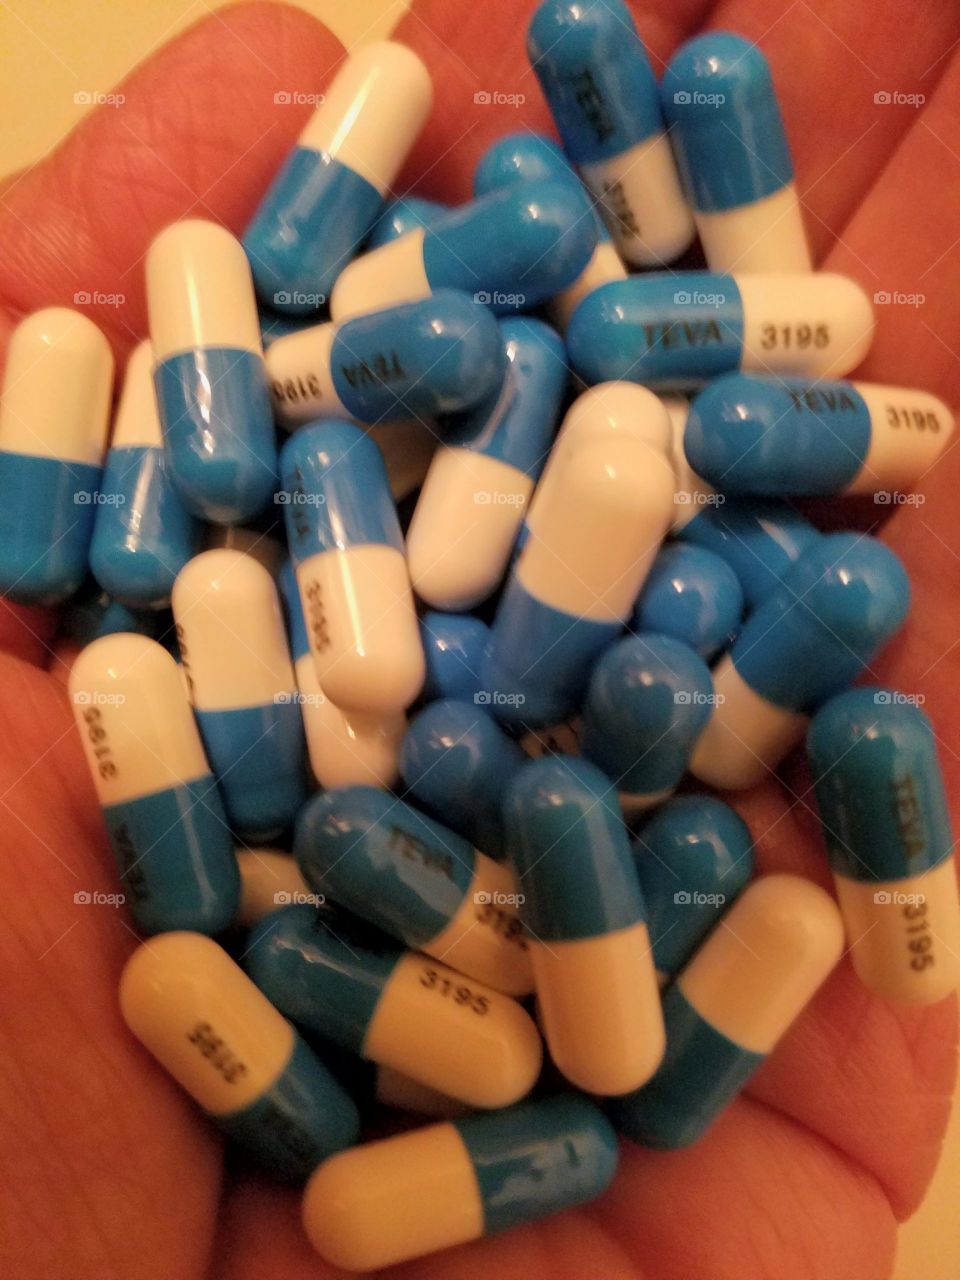 Medication Capsules, blue and white.